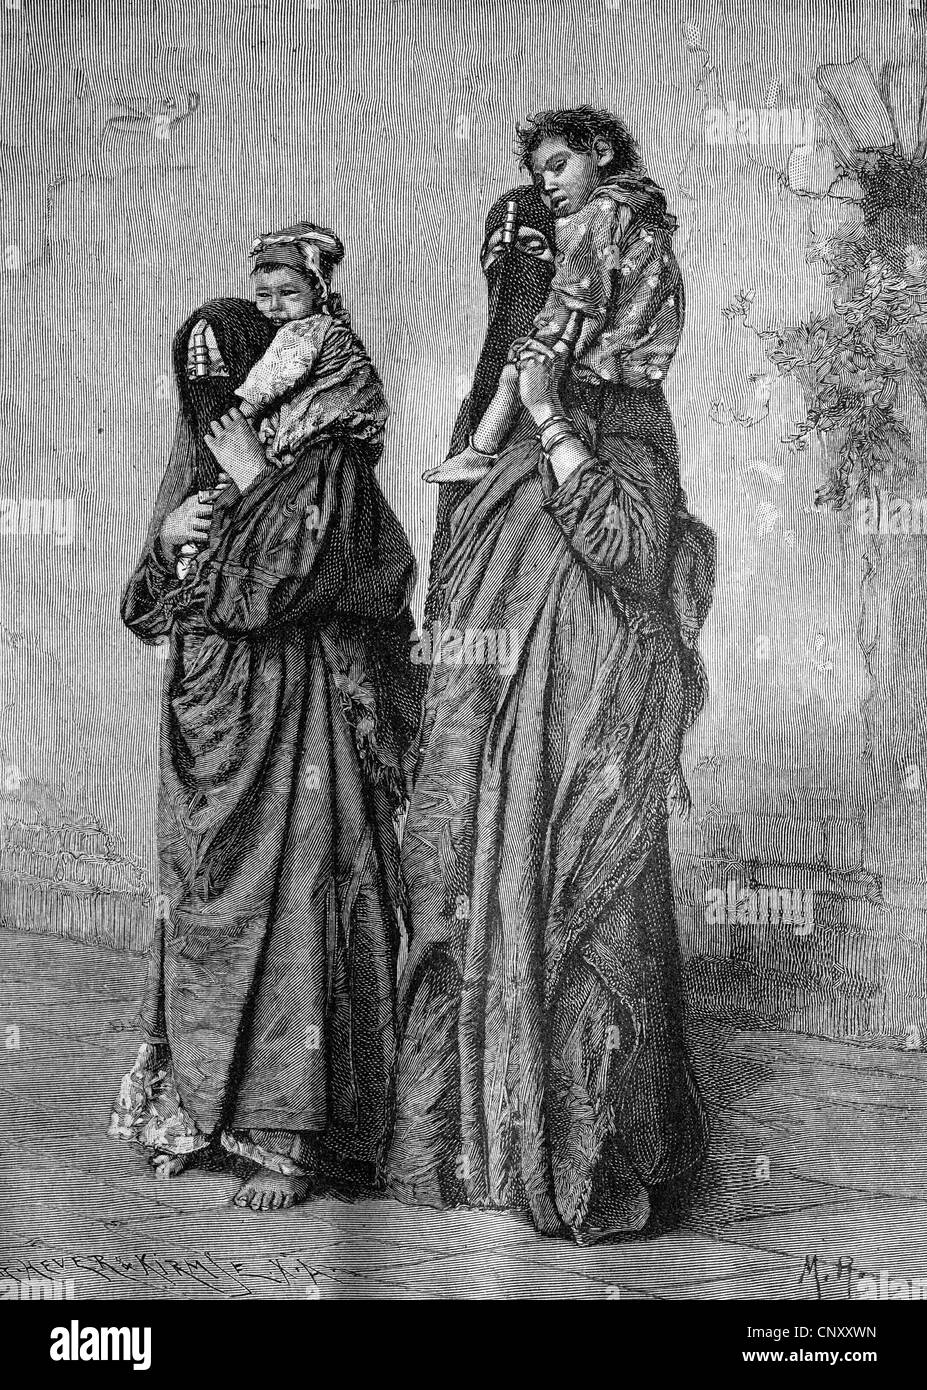 Egyptians, women and their children, historic wood engraving, about 1897 Stock Photo